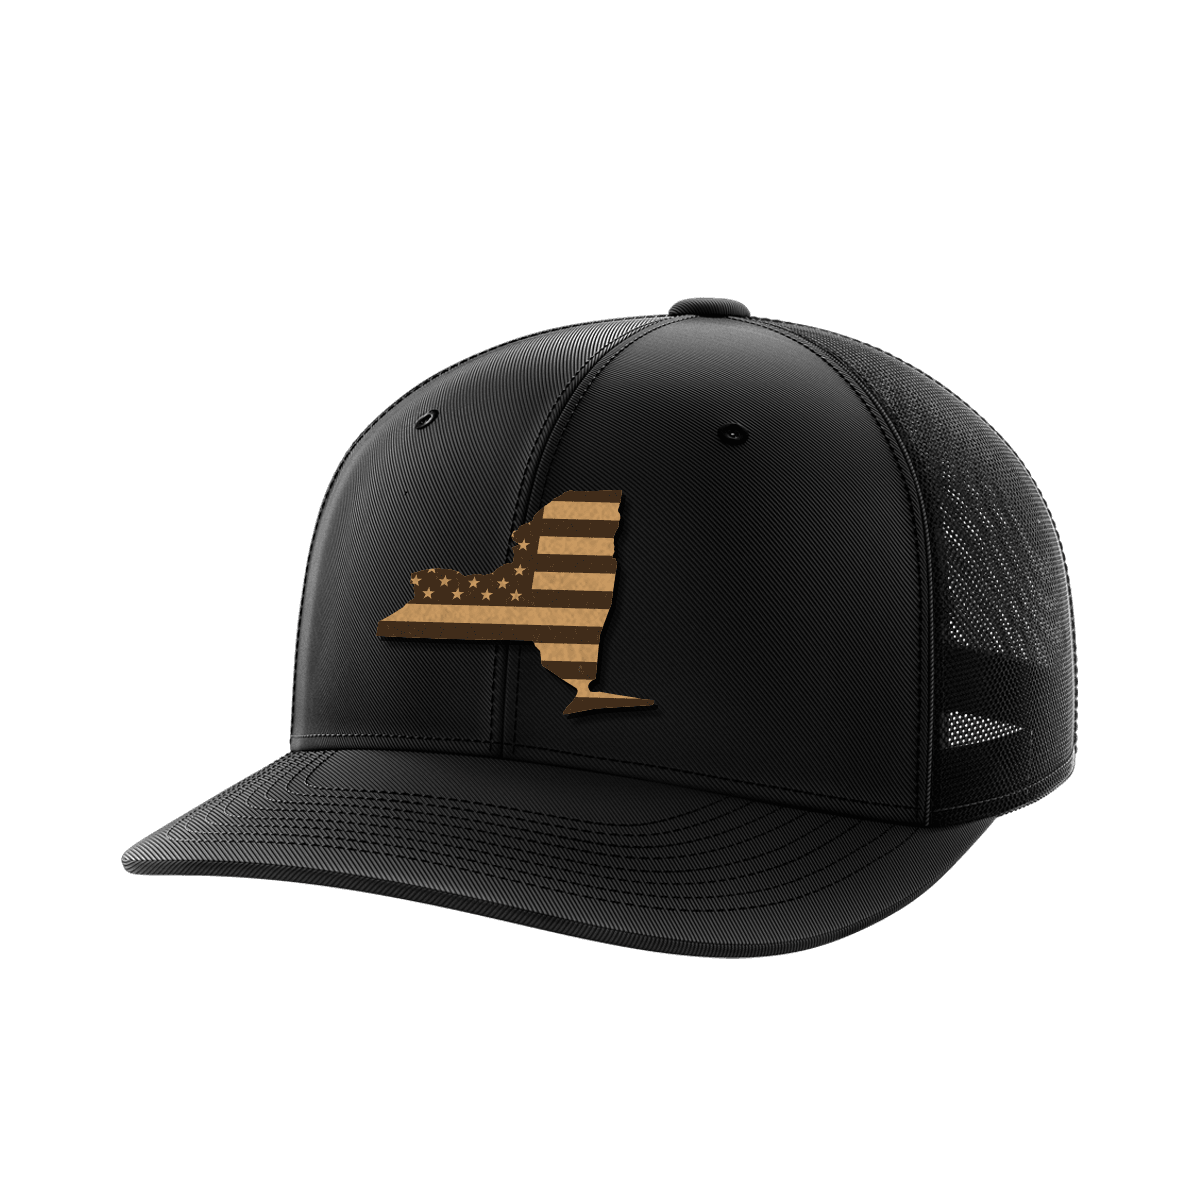 New York United Collection (leather) - Greater Half